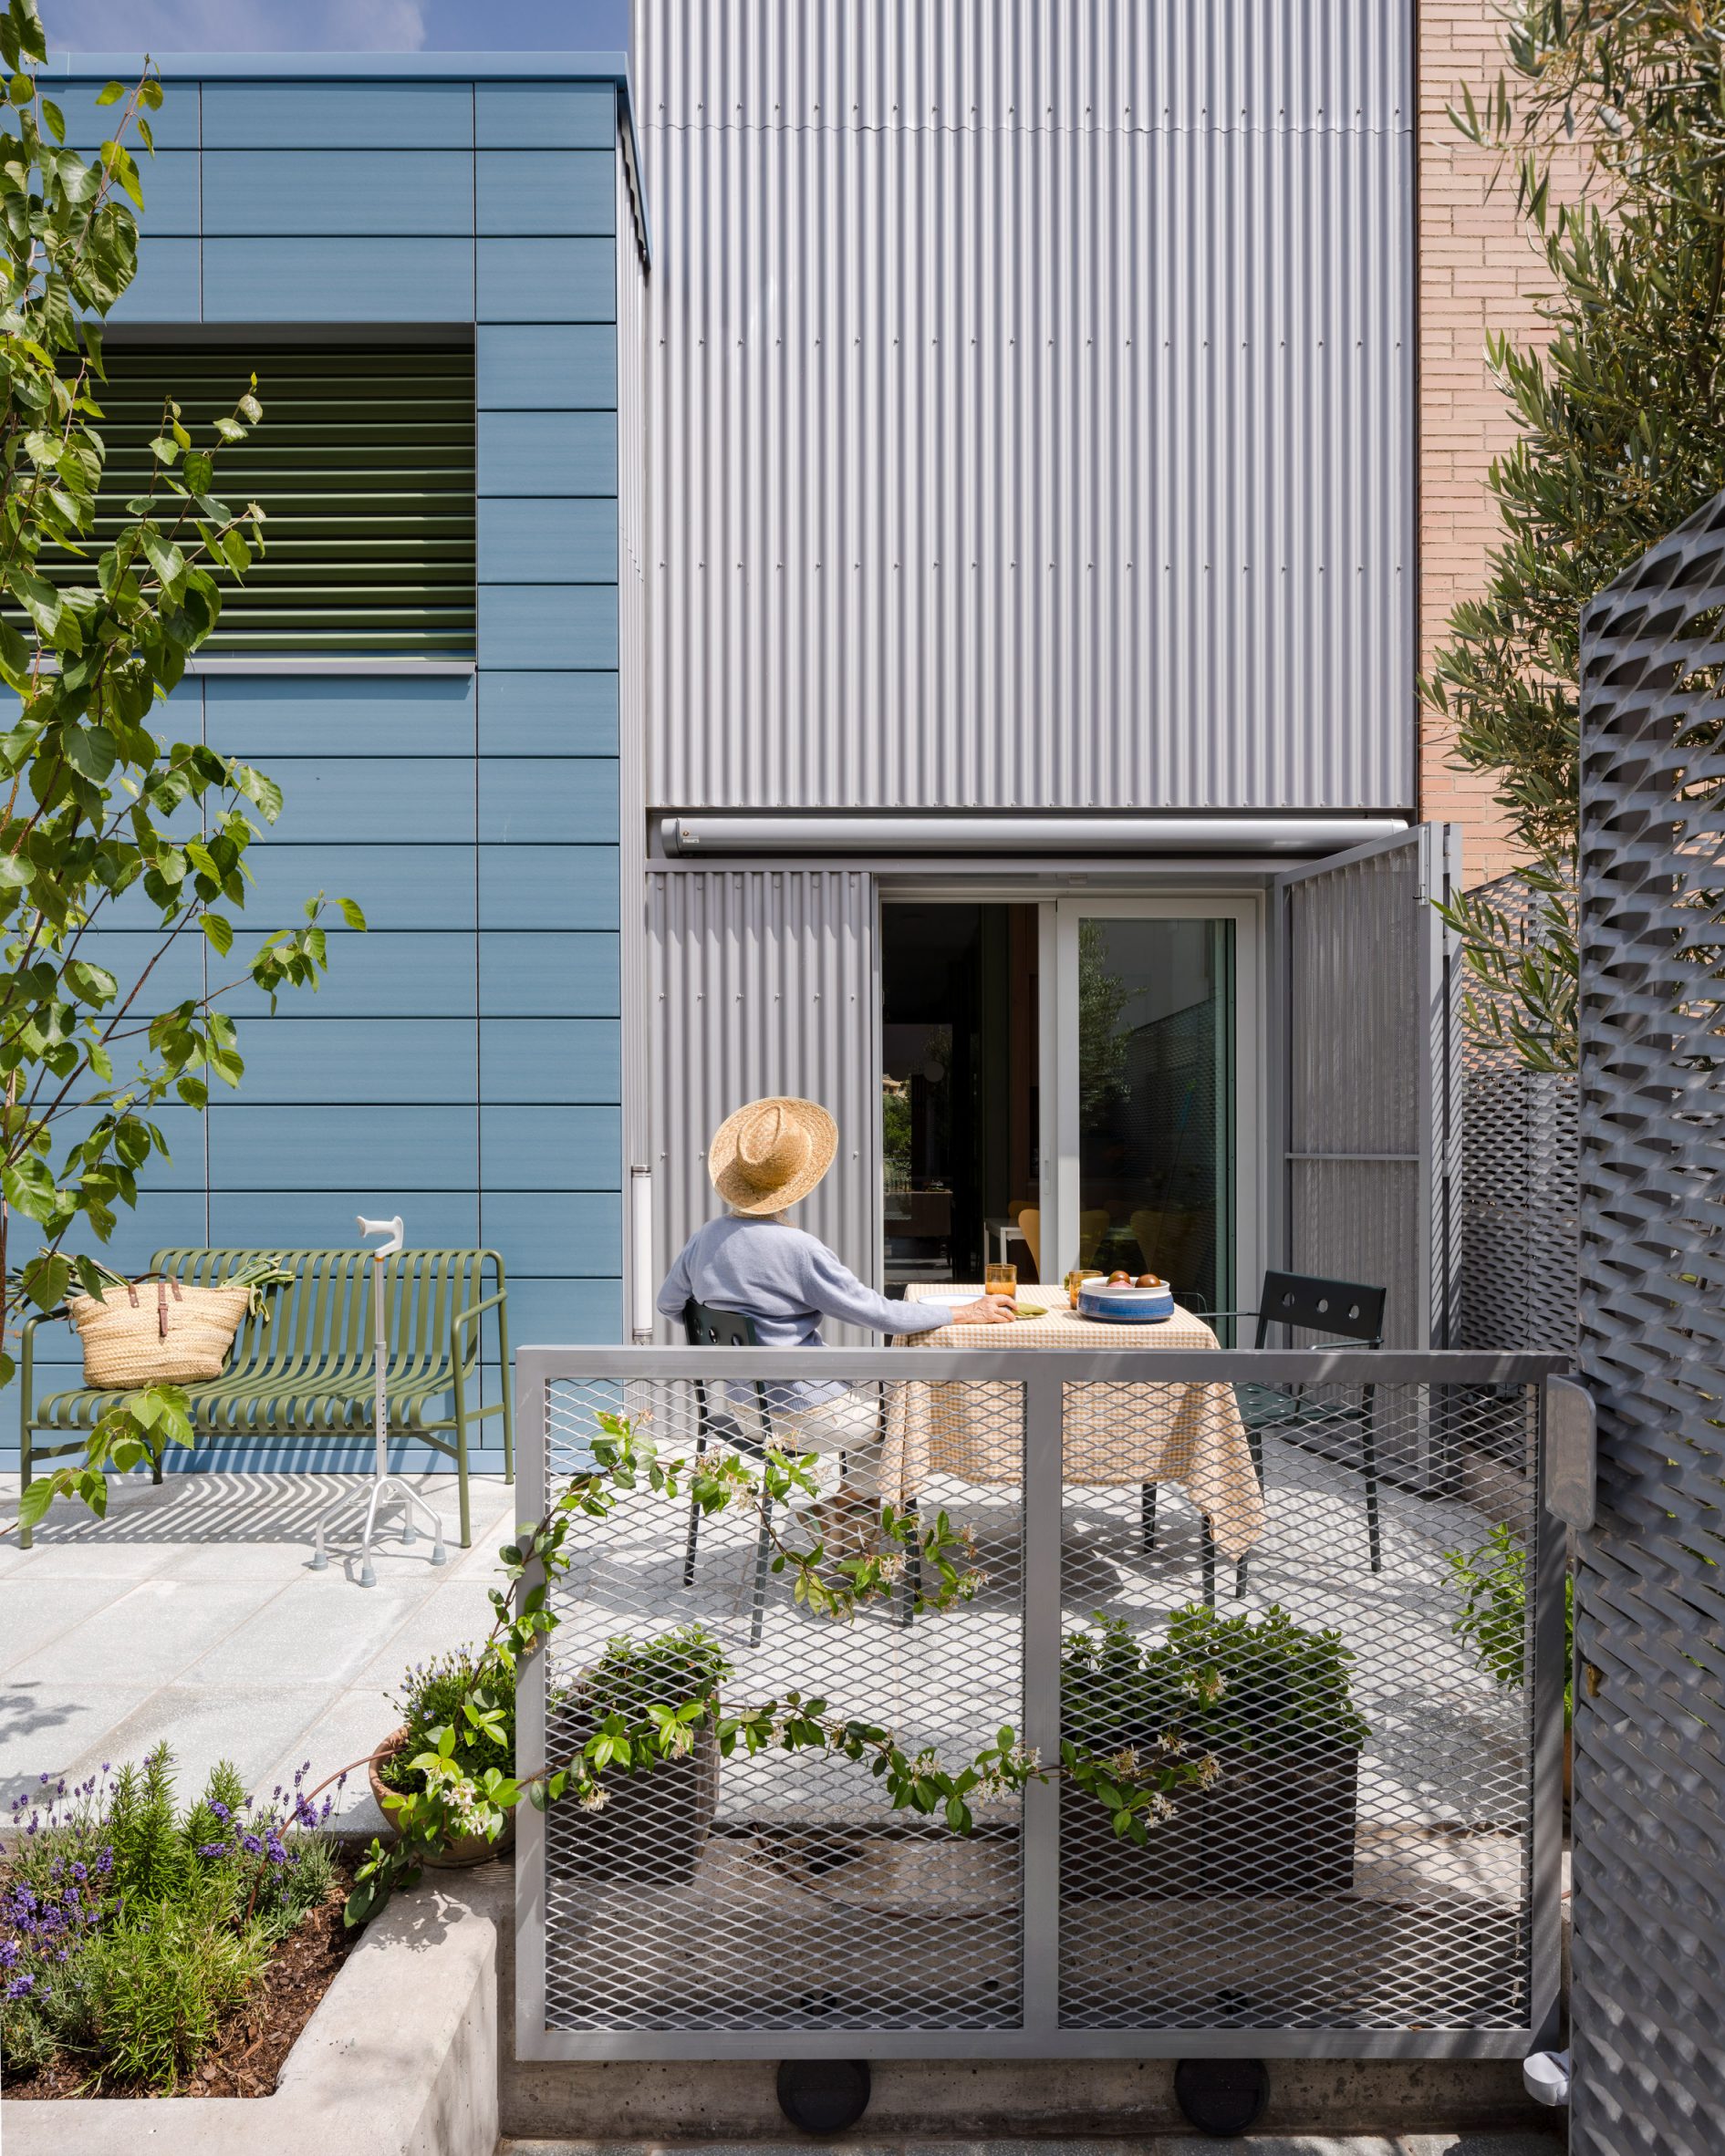 External courtyard of home in Madrid